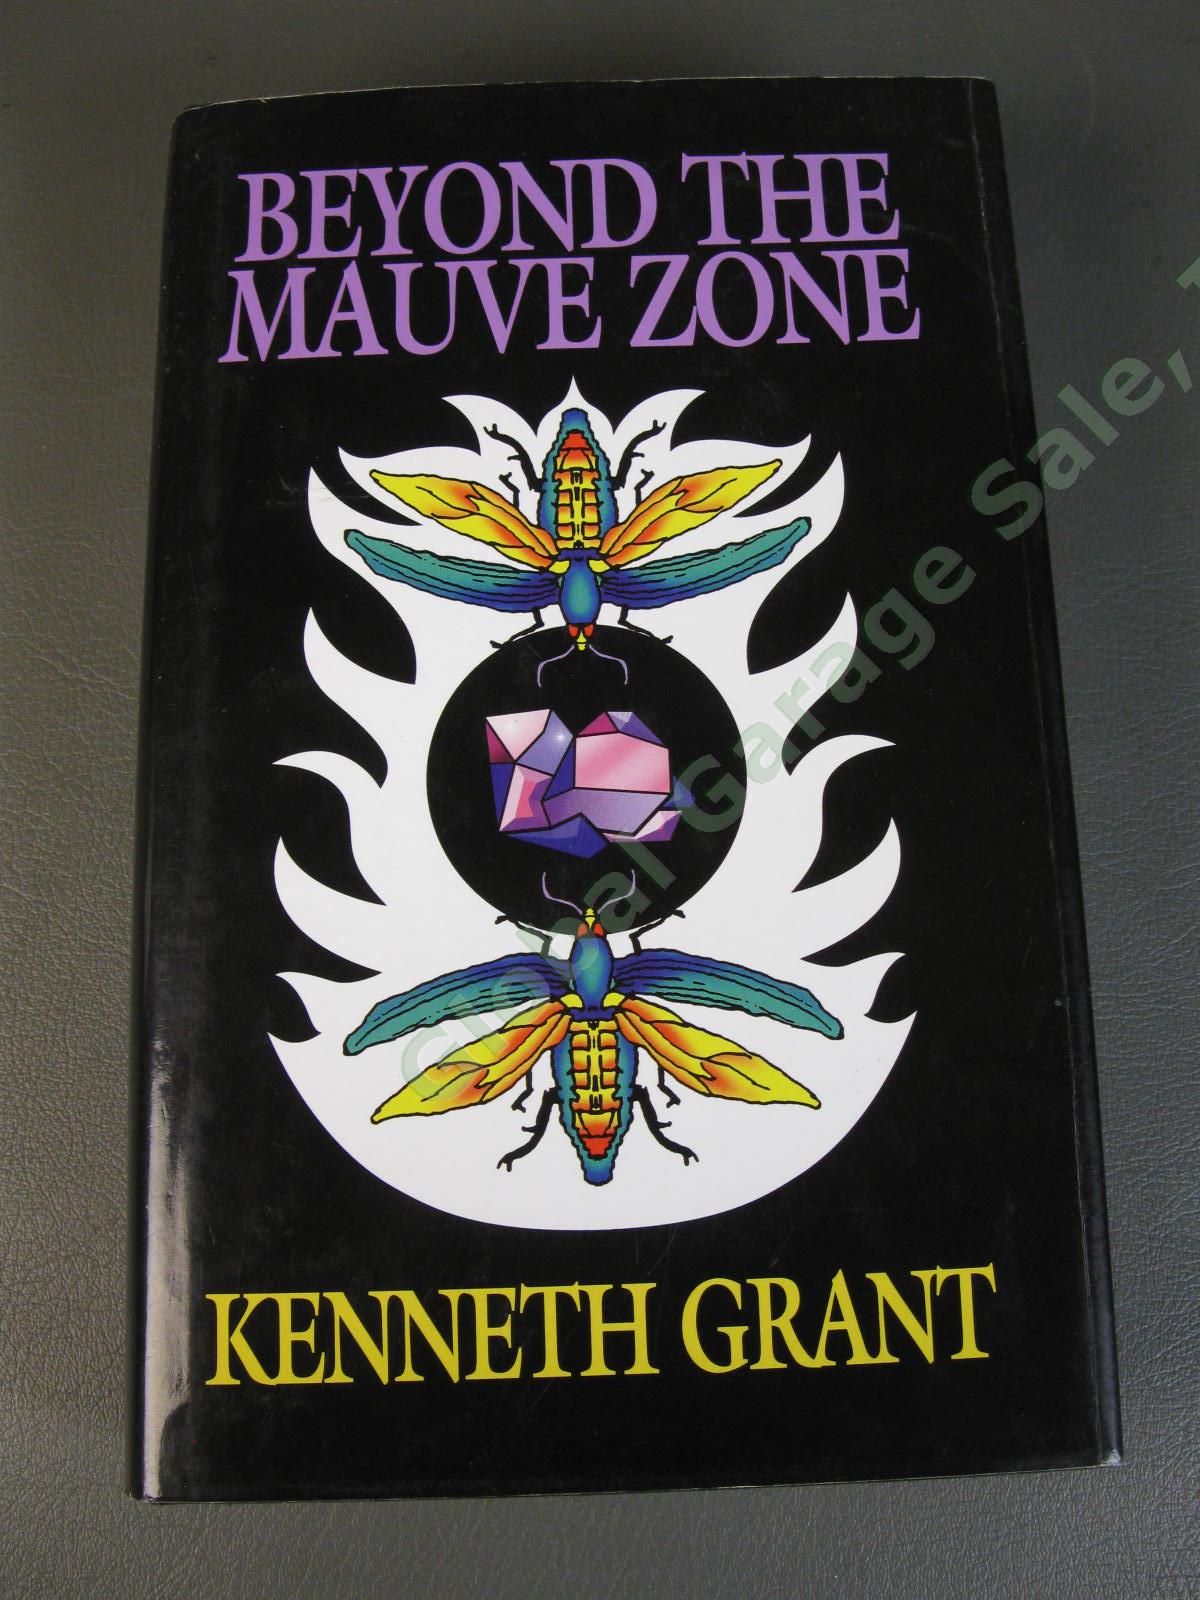 RARE 1999 1st Ed Edition BEYOND THE MAUVE ZONE Kenneth Grant Starfire Crowley NR